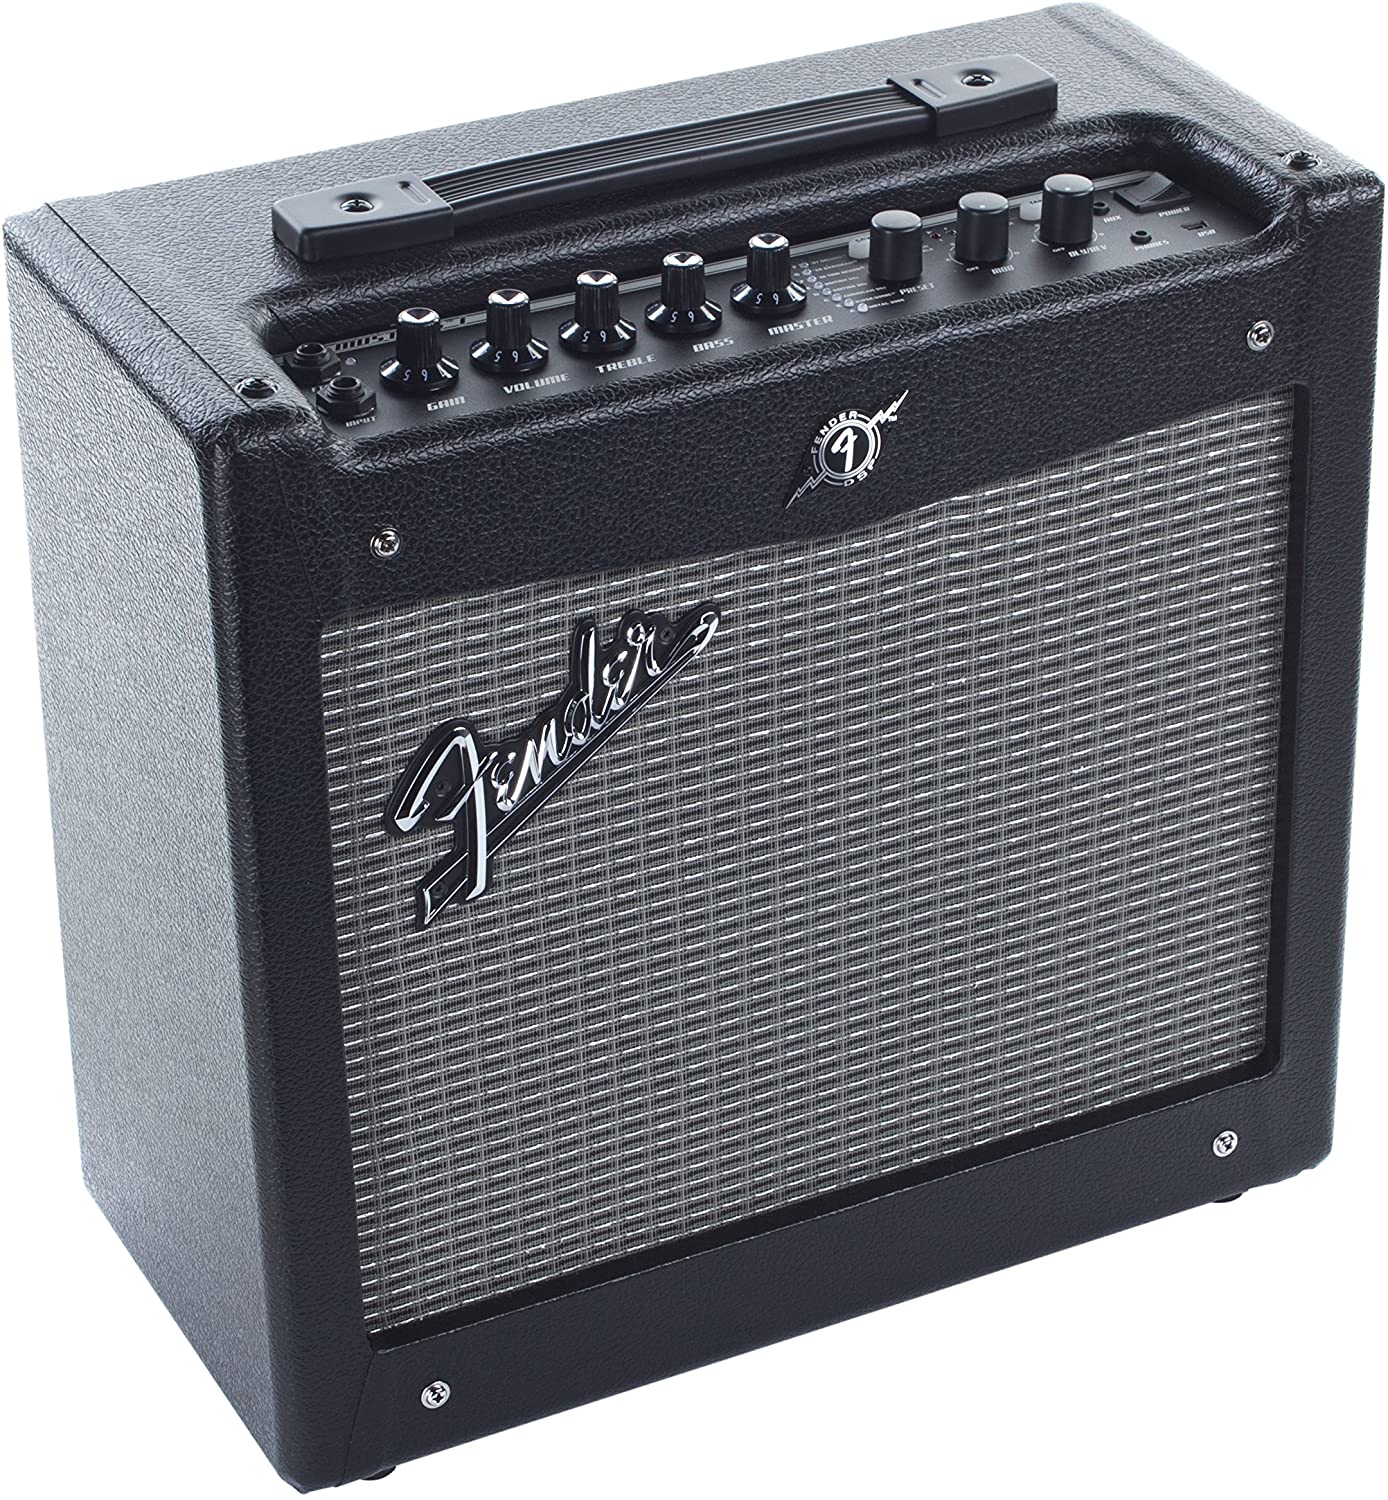 Fender Mustang 1 V2 Amplifiers & Effects - Scayles Music